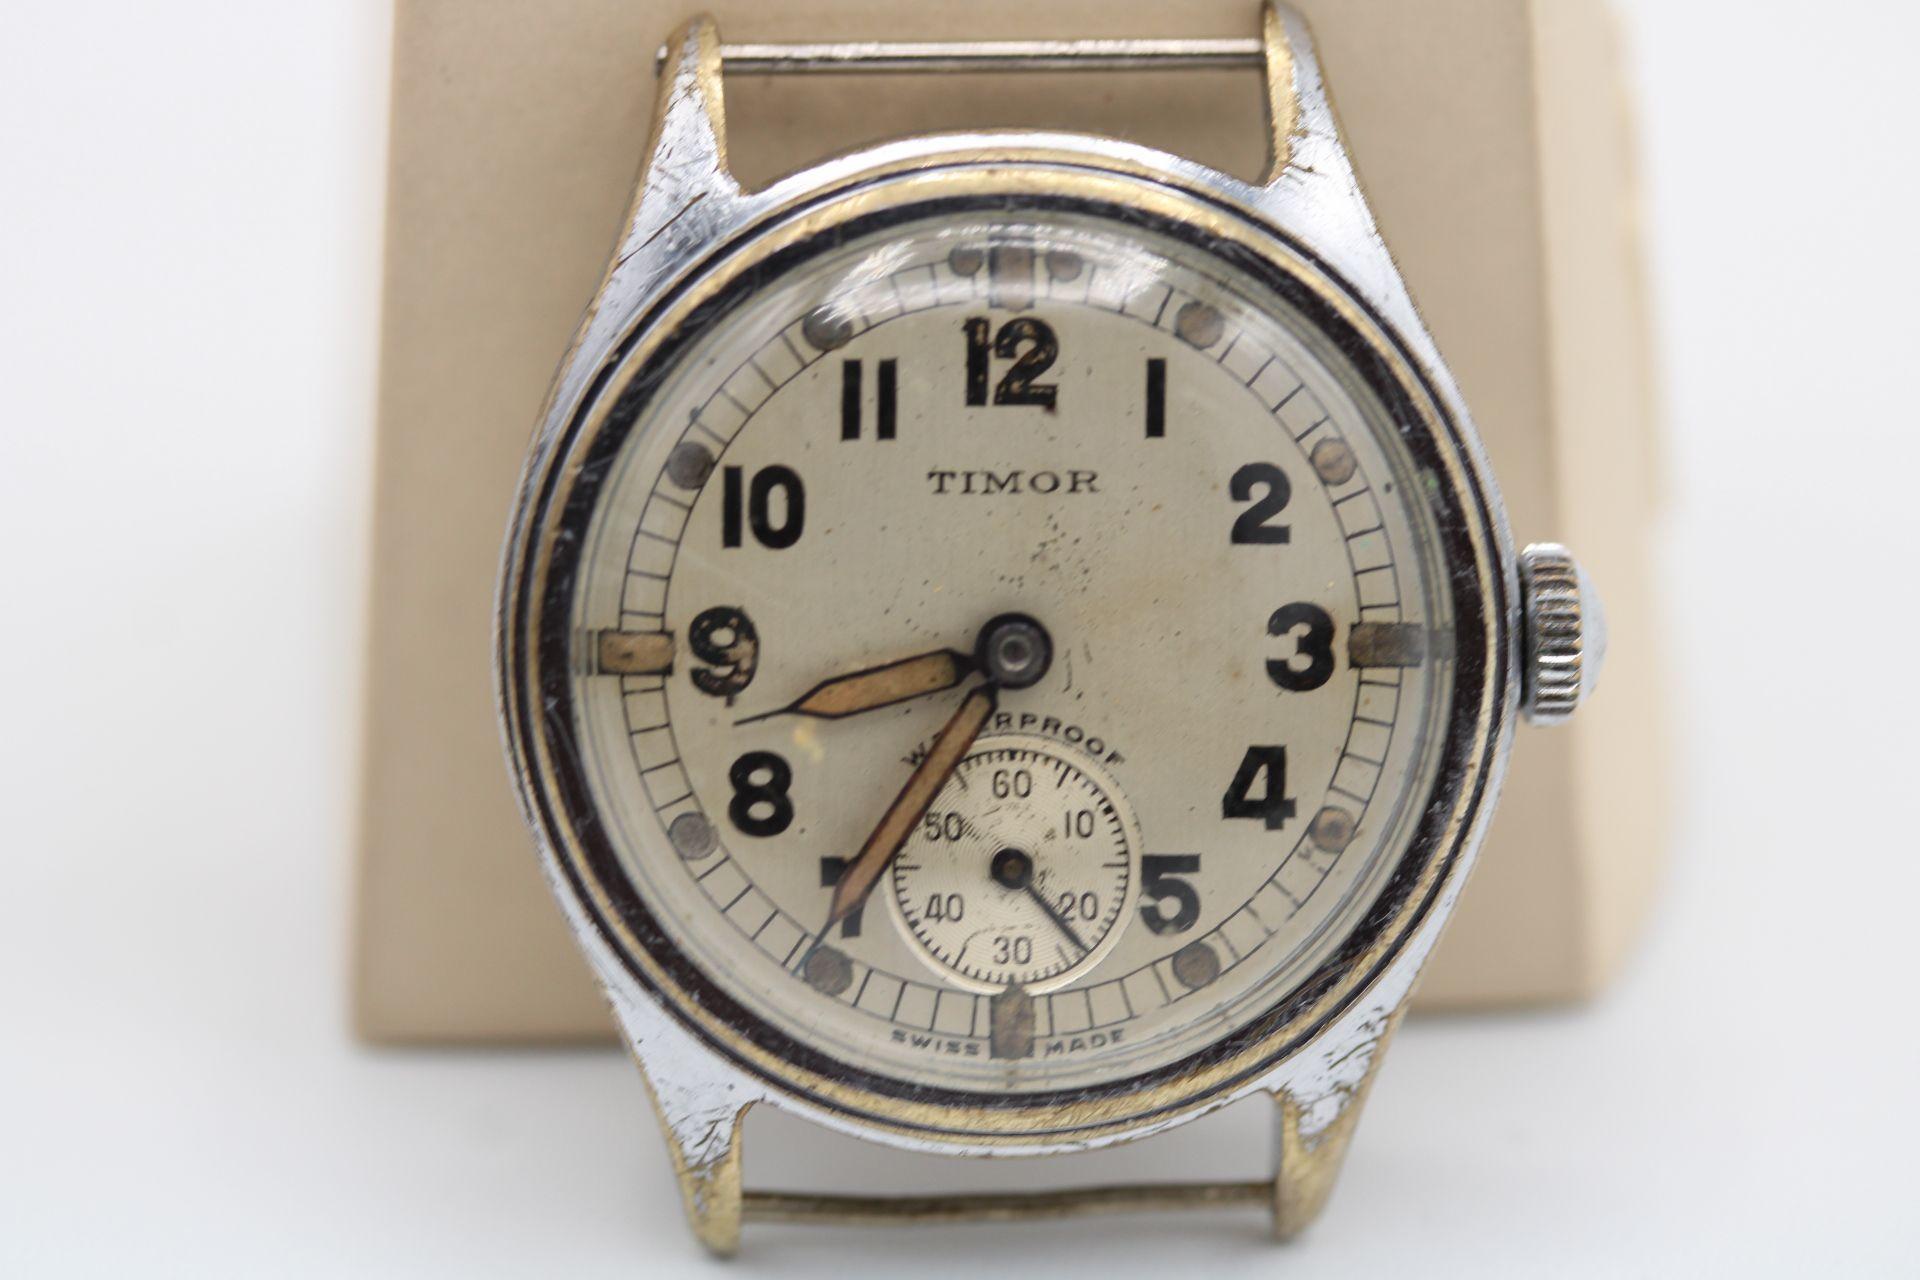 Watch: Timor ATP British Military
Stock Number: CHW5297
Price: £950.00

At the beginning of world war two, The British Army needed watches for its troops
fighting overseas. They acquired watches from many brands under the new Army
Trade Pattern or